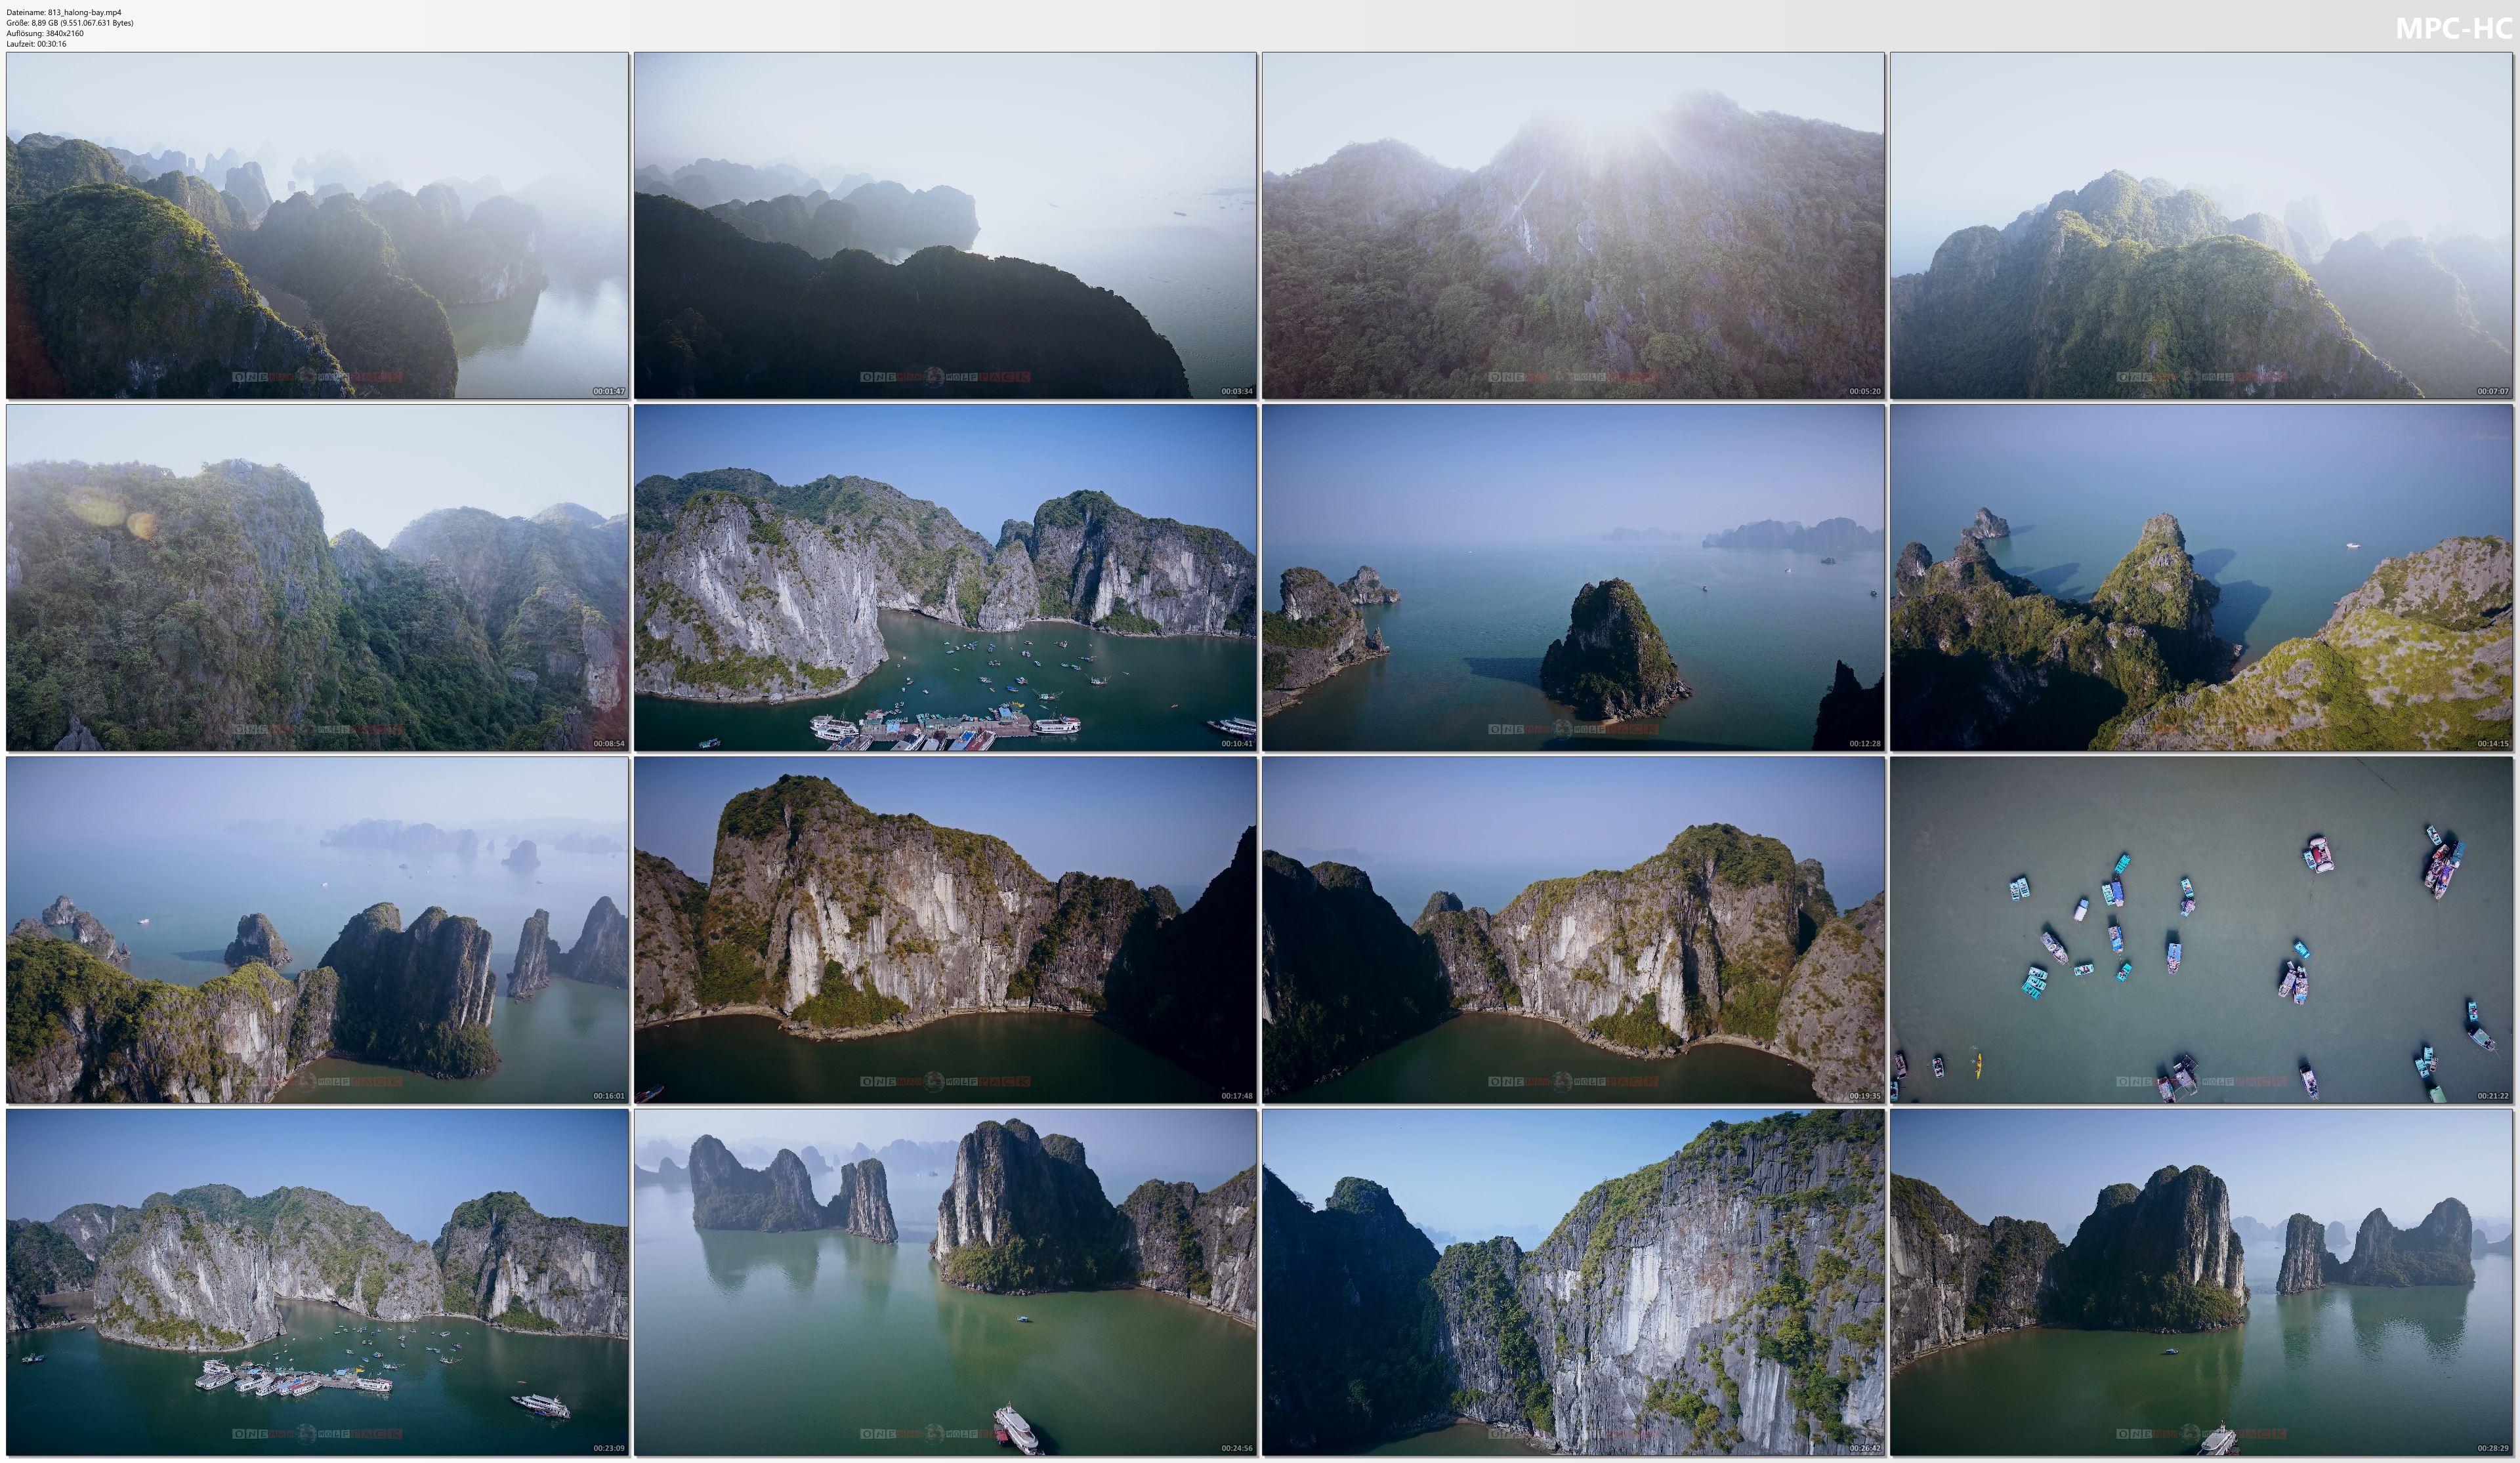 Drone Pictures from Video 【4K】½ HOUR DRONE FILM: «Halong Bay» | Vietnam Ultra HD | Chillout Music (2160p Ambient UHD TV)